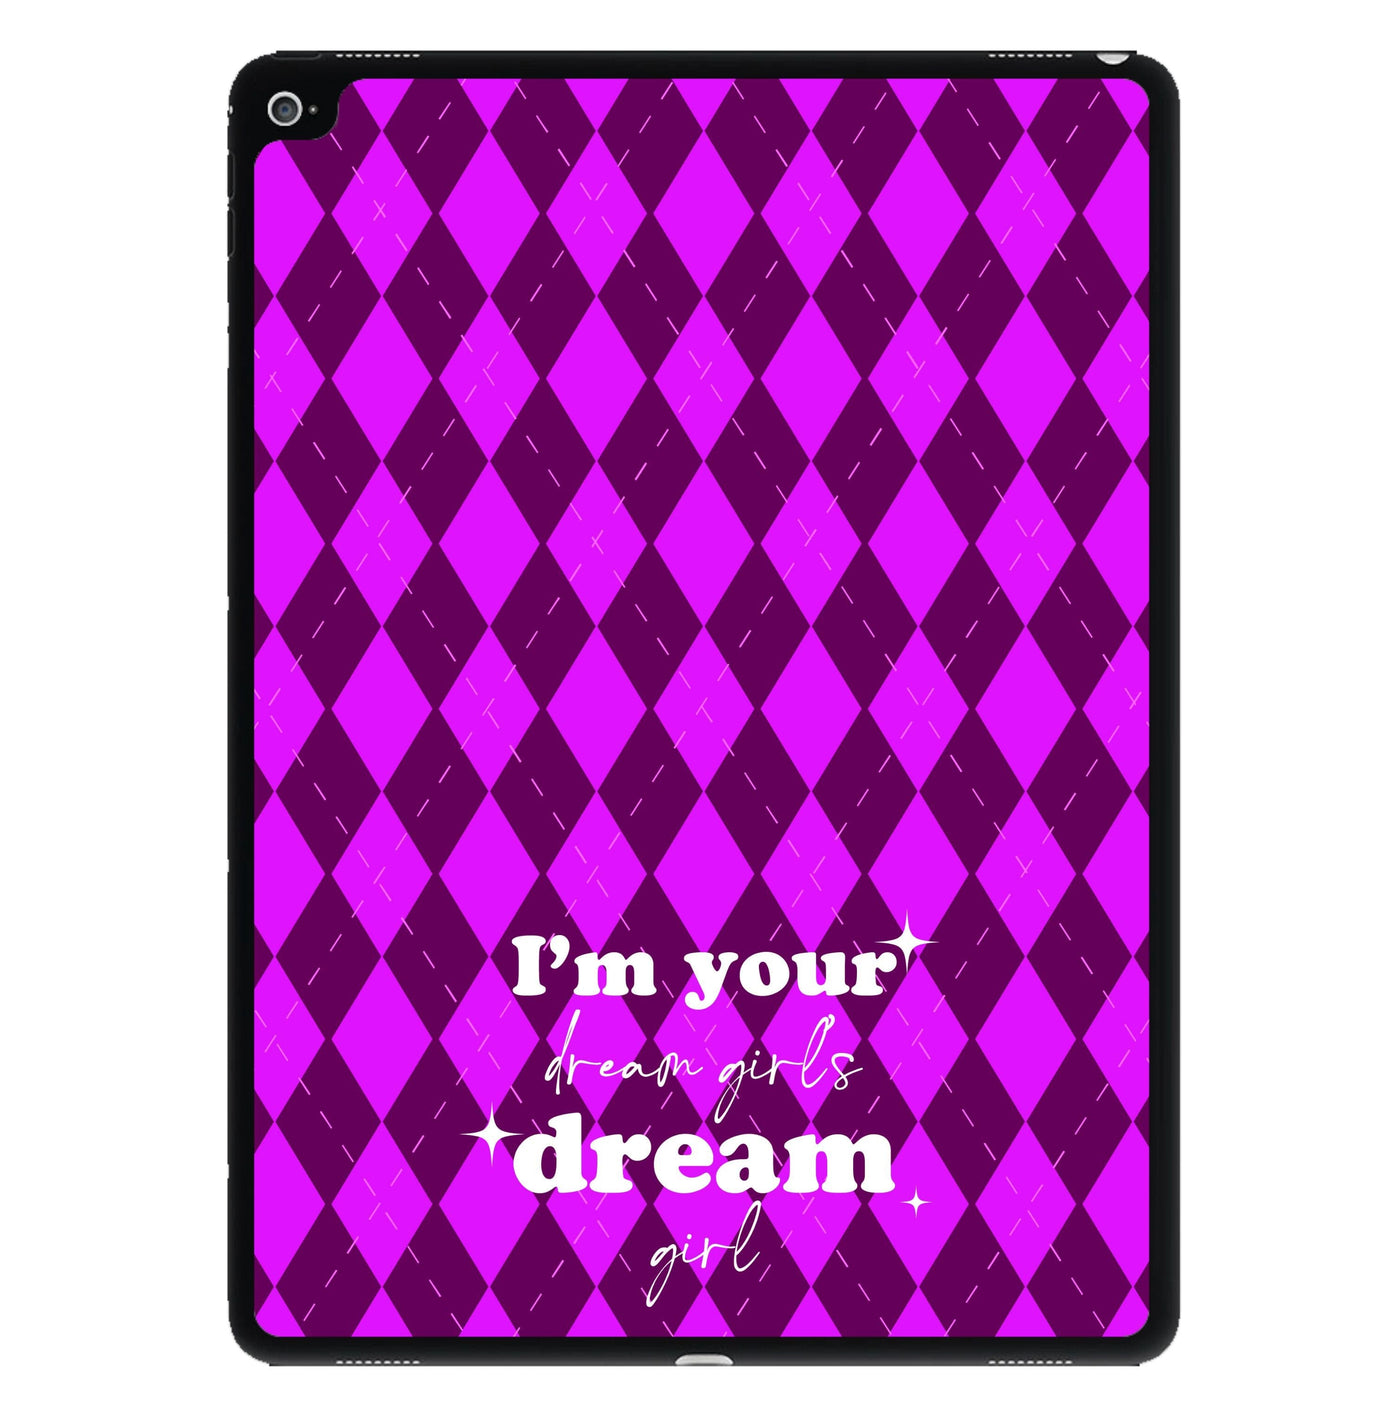 I'm Your Dream Girls Dream Girl - Chappell Roan iPad Case